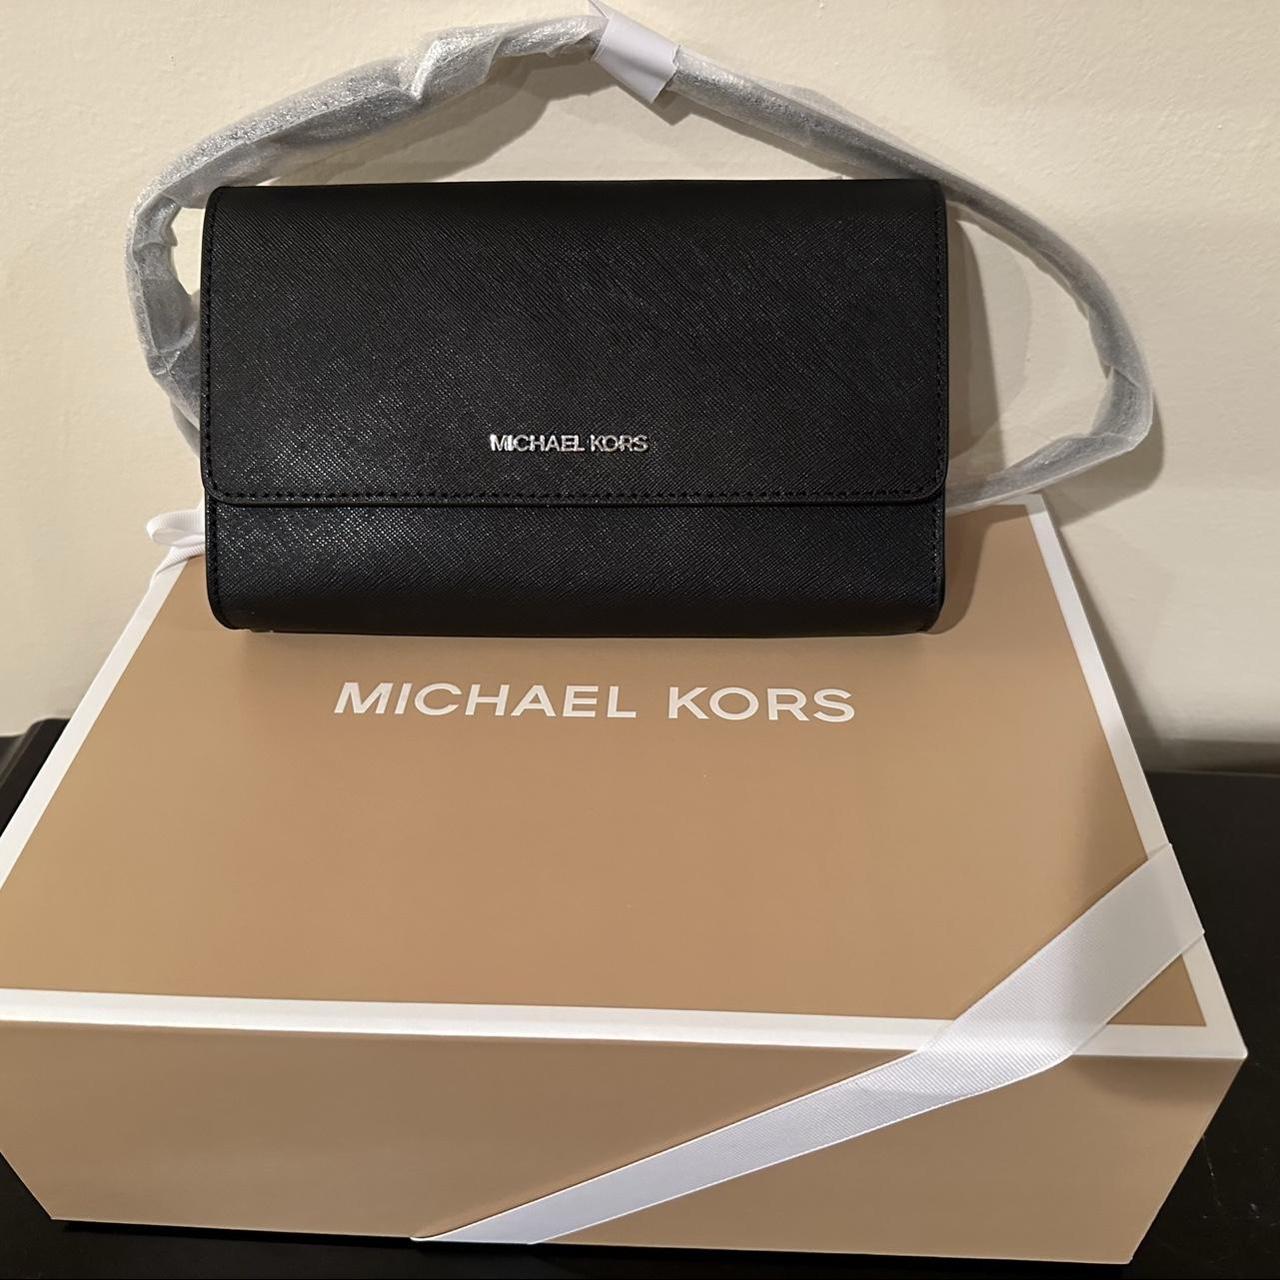 How to tell if a Michael Kors purse is fake - Quora